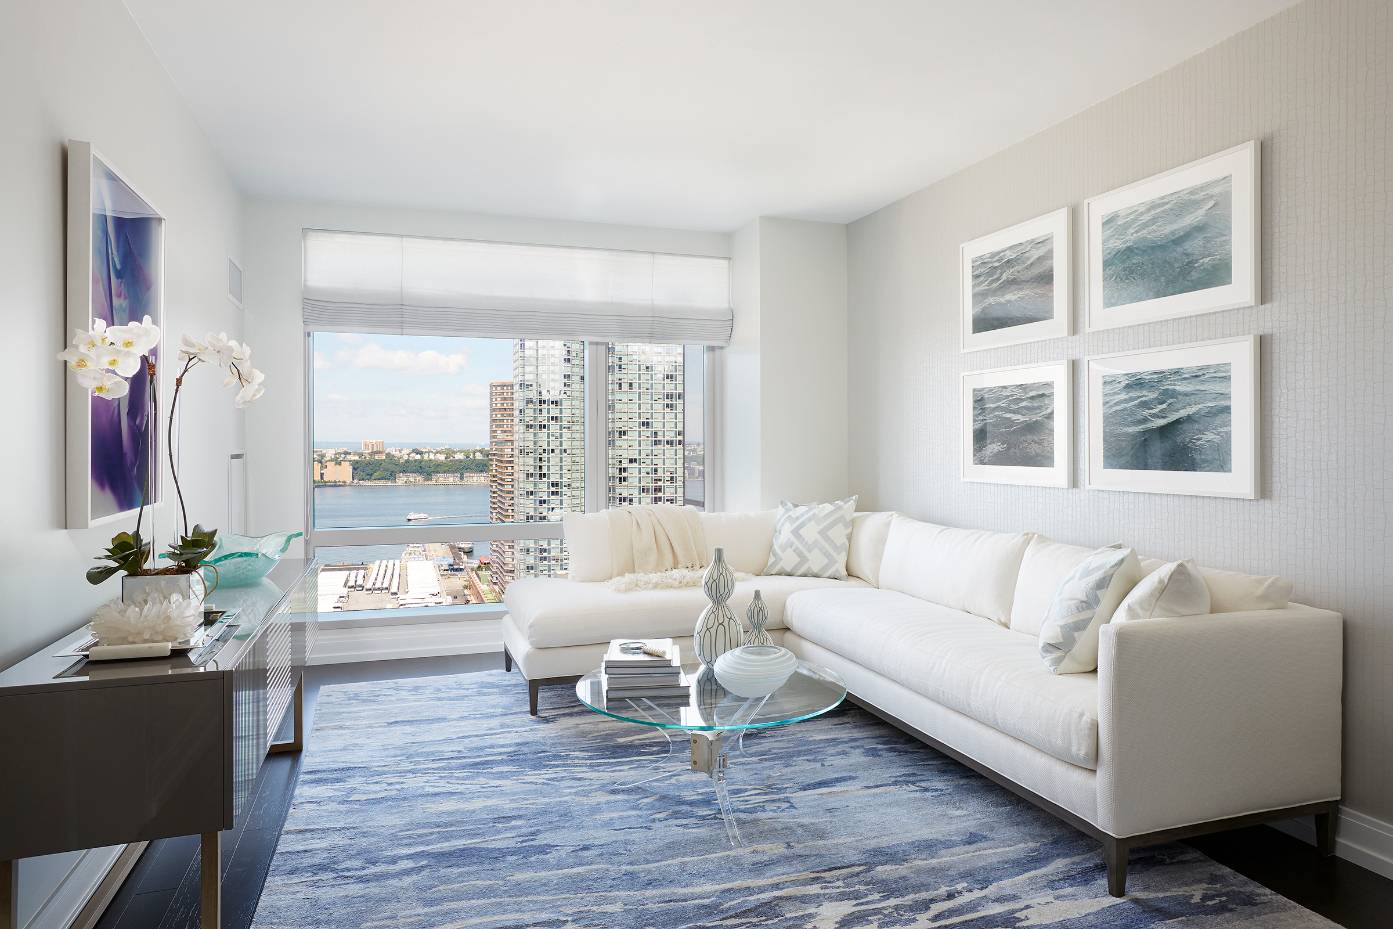 With sweeping views of the city from sunrise to sunset 555TEN towers over the new West Side.